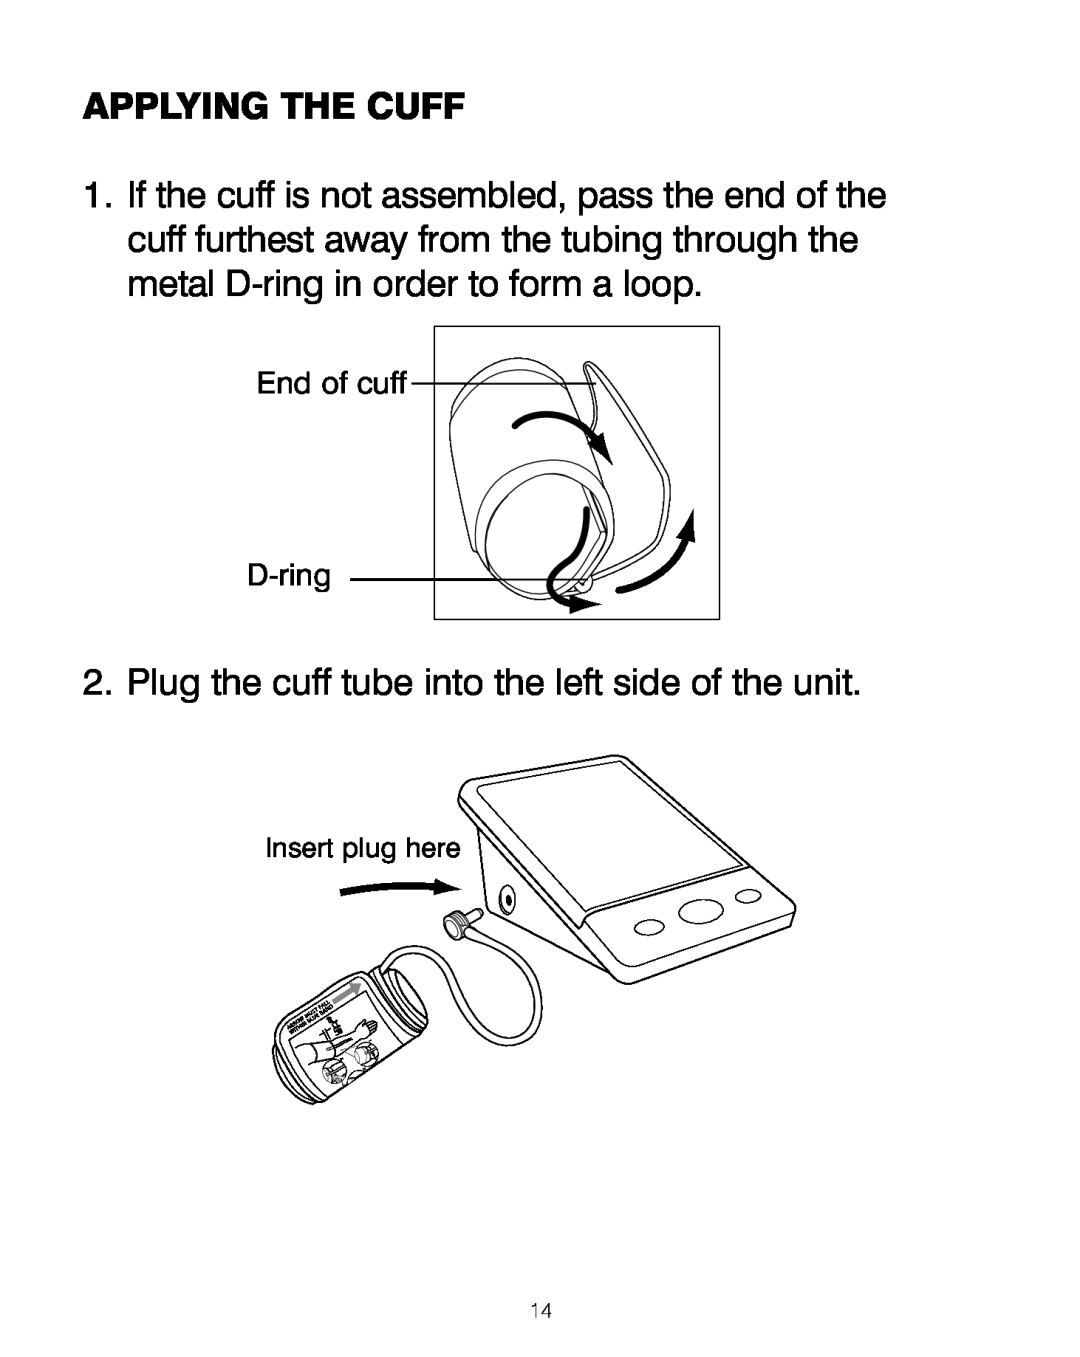 HoMedics BPA-200 manual Applying The Cuff, Plug the cuff tube into the left side of the unit 